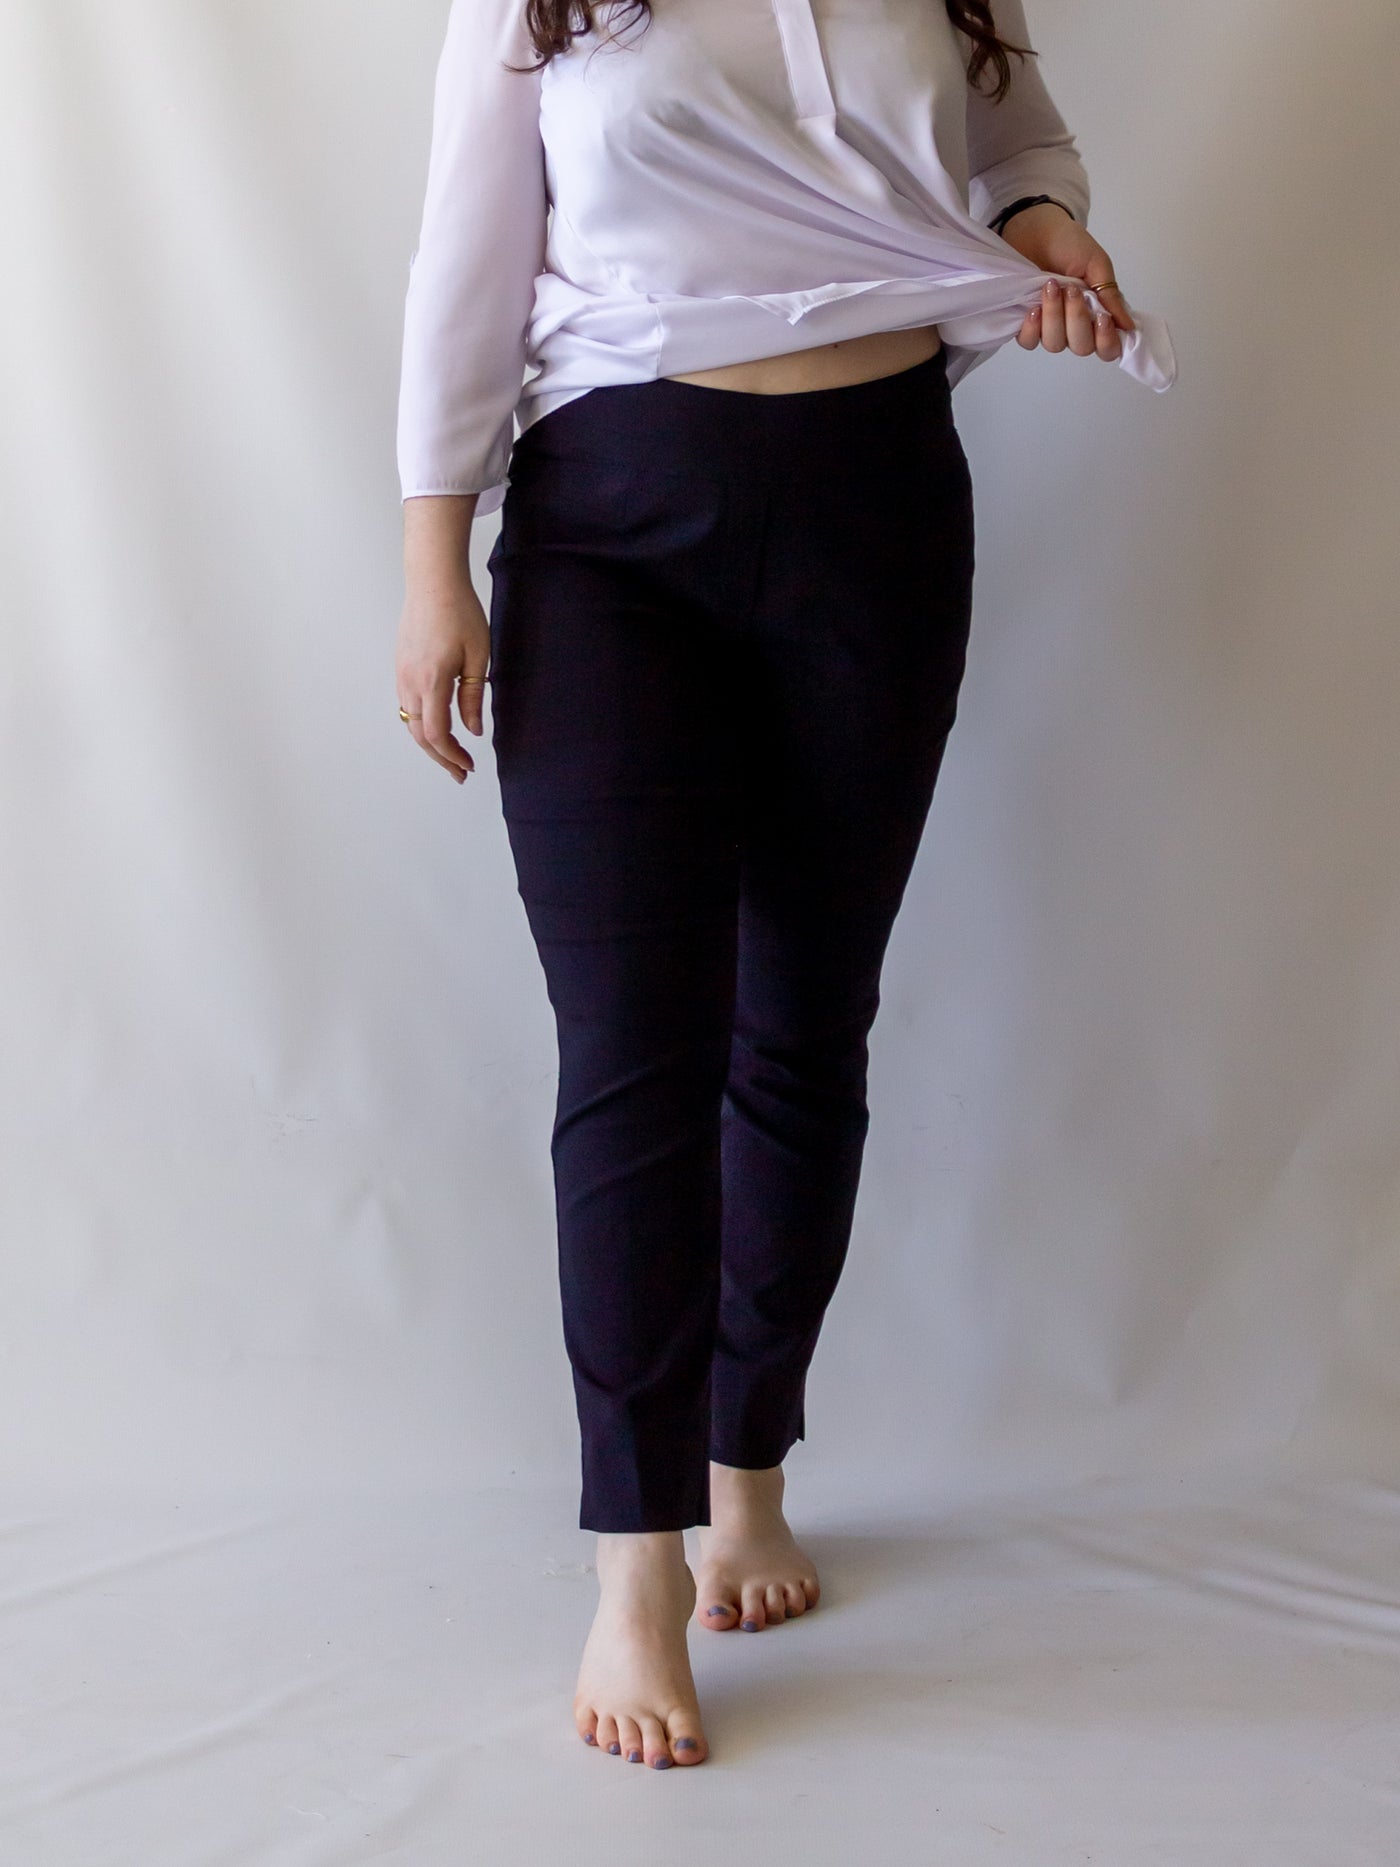 A model wearing a pair of navy colored cigarette pants and a white blouse.